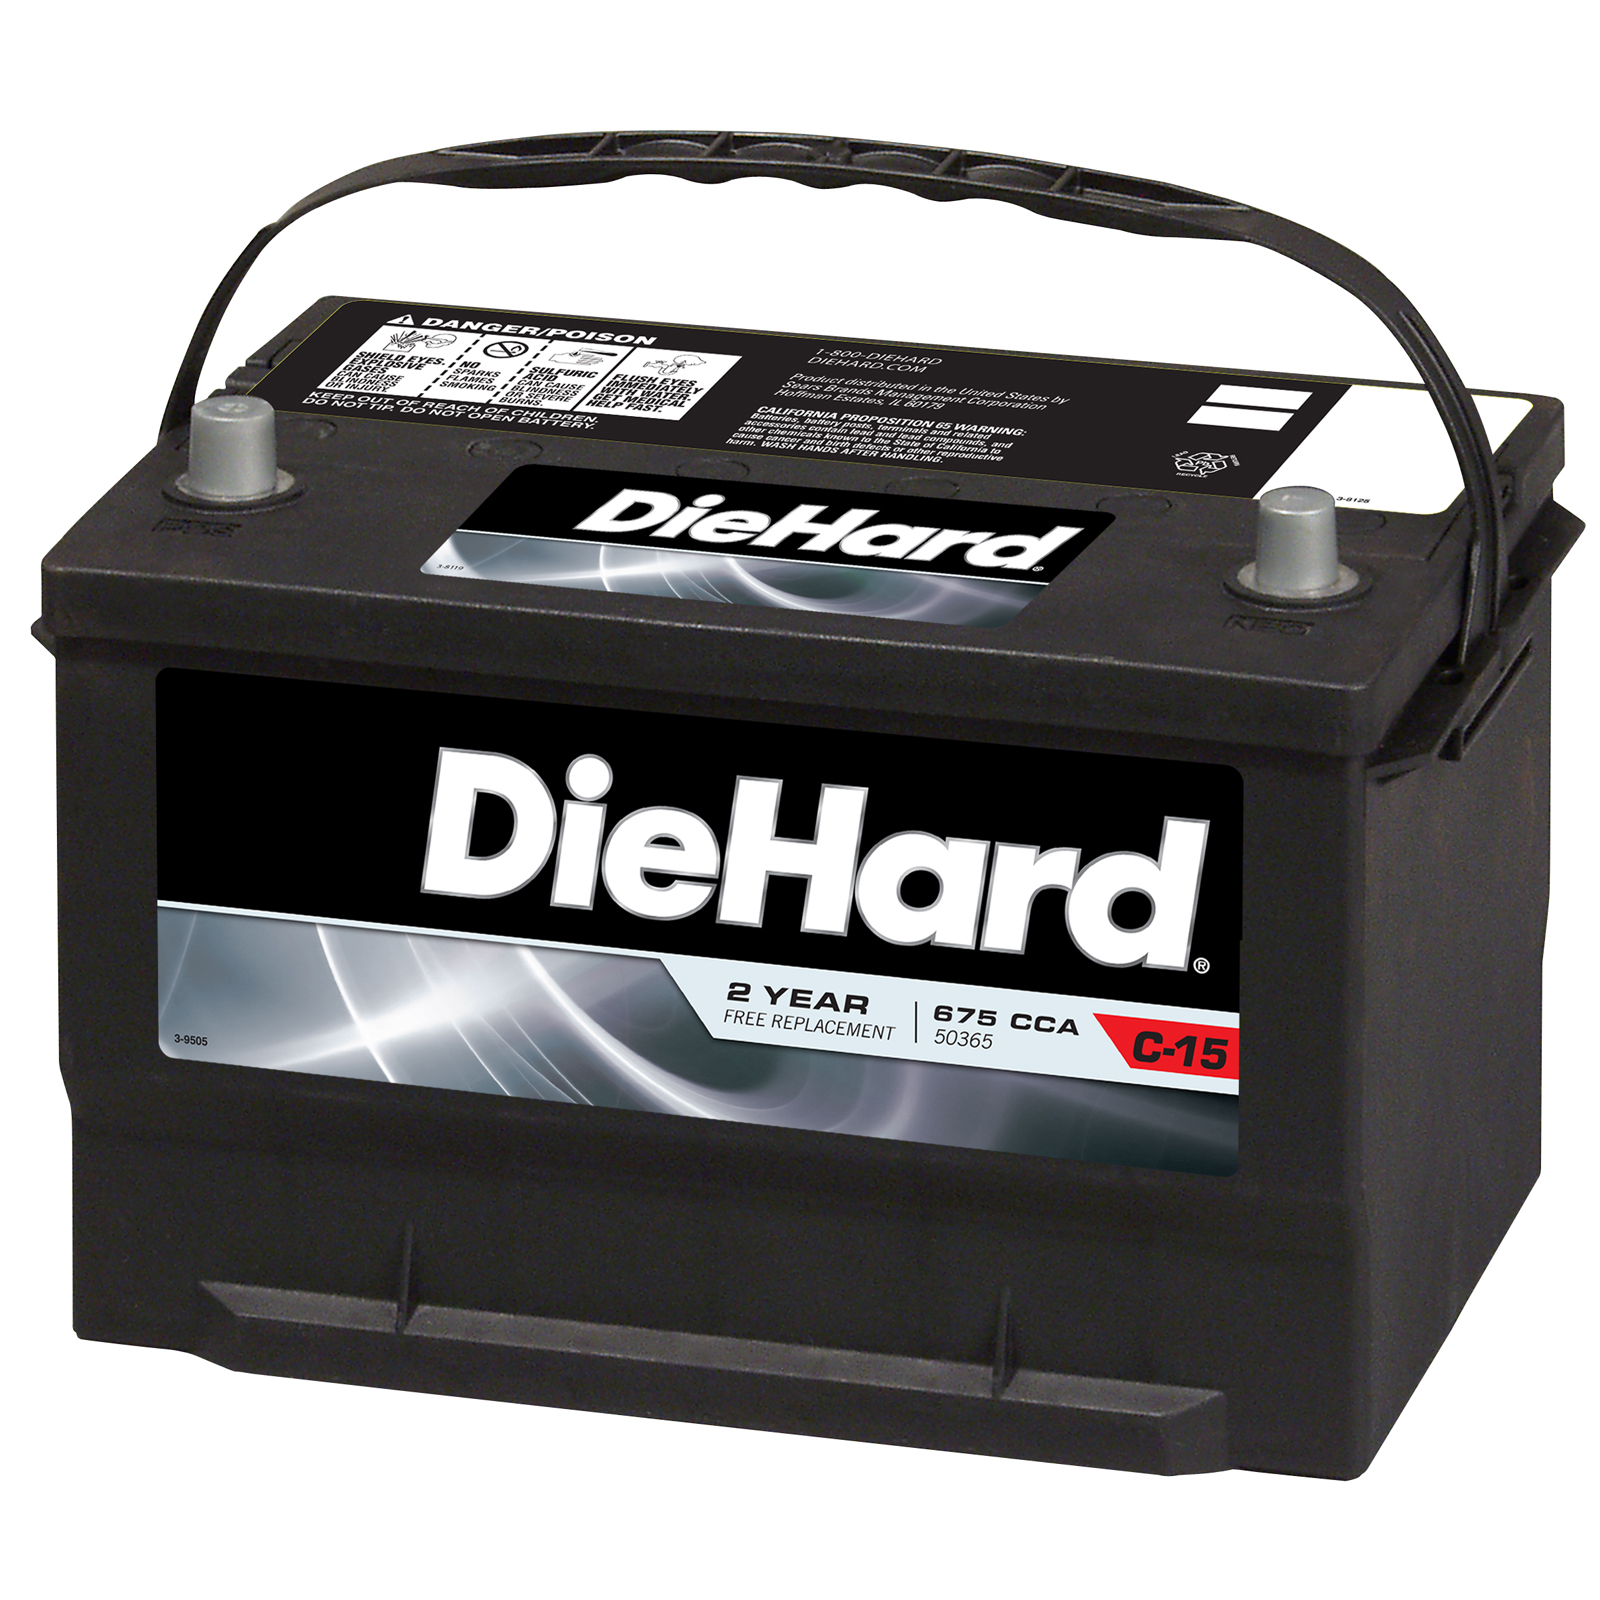 DieHard Automotive Battery - Group Size EP-65 (Price with Exchange)